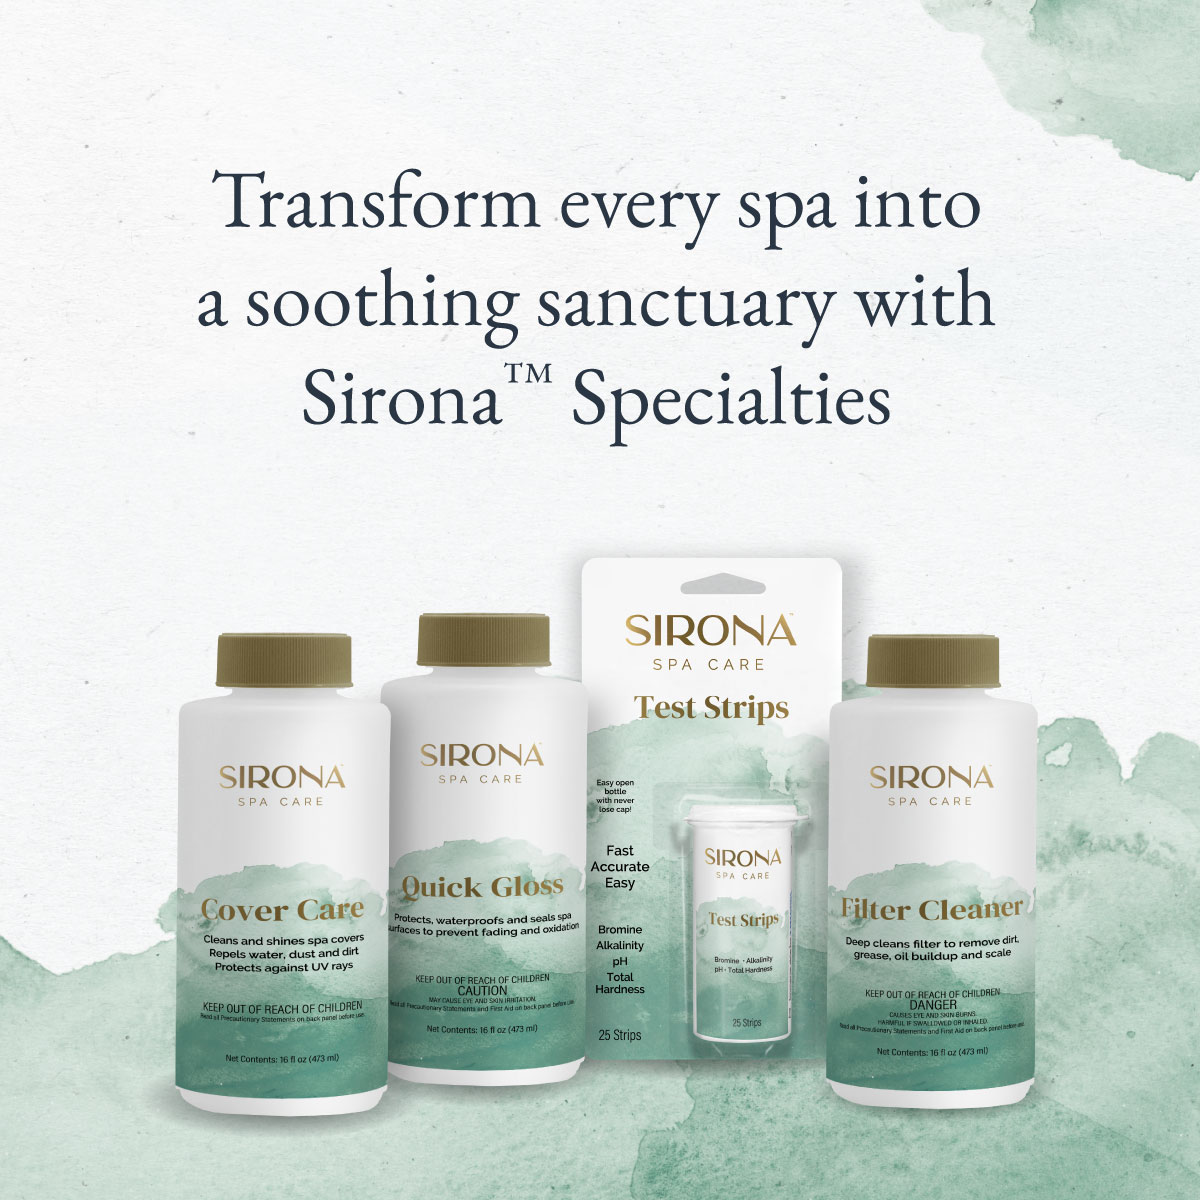 Transform every spa into a soothing sanctuary with Sirona™ Specialties